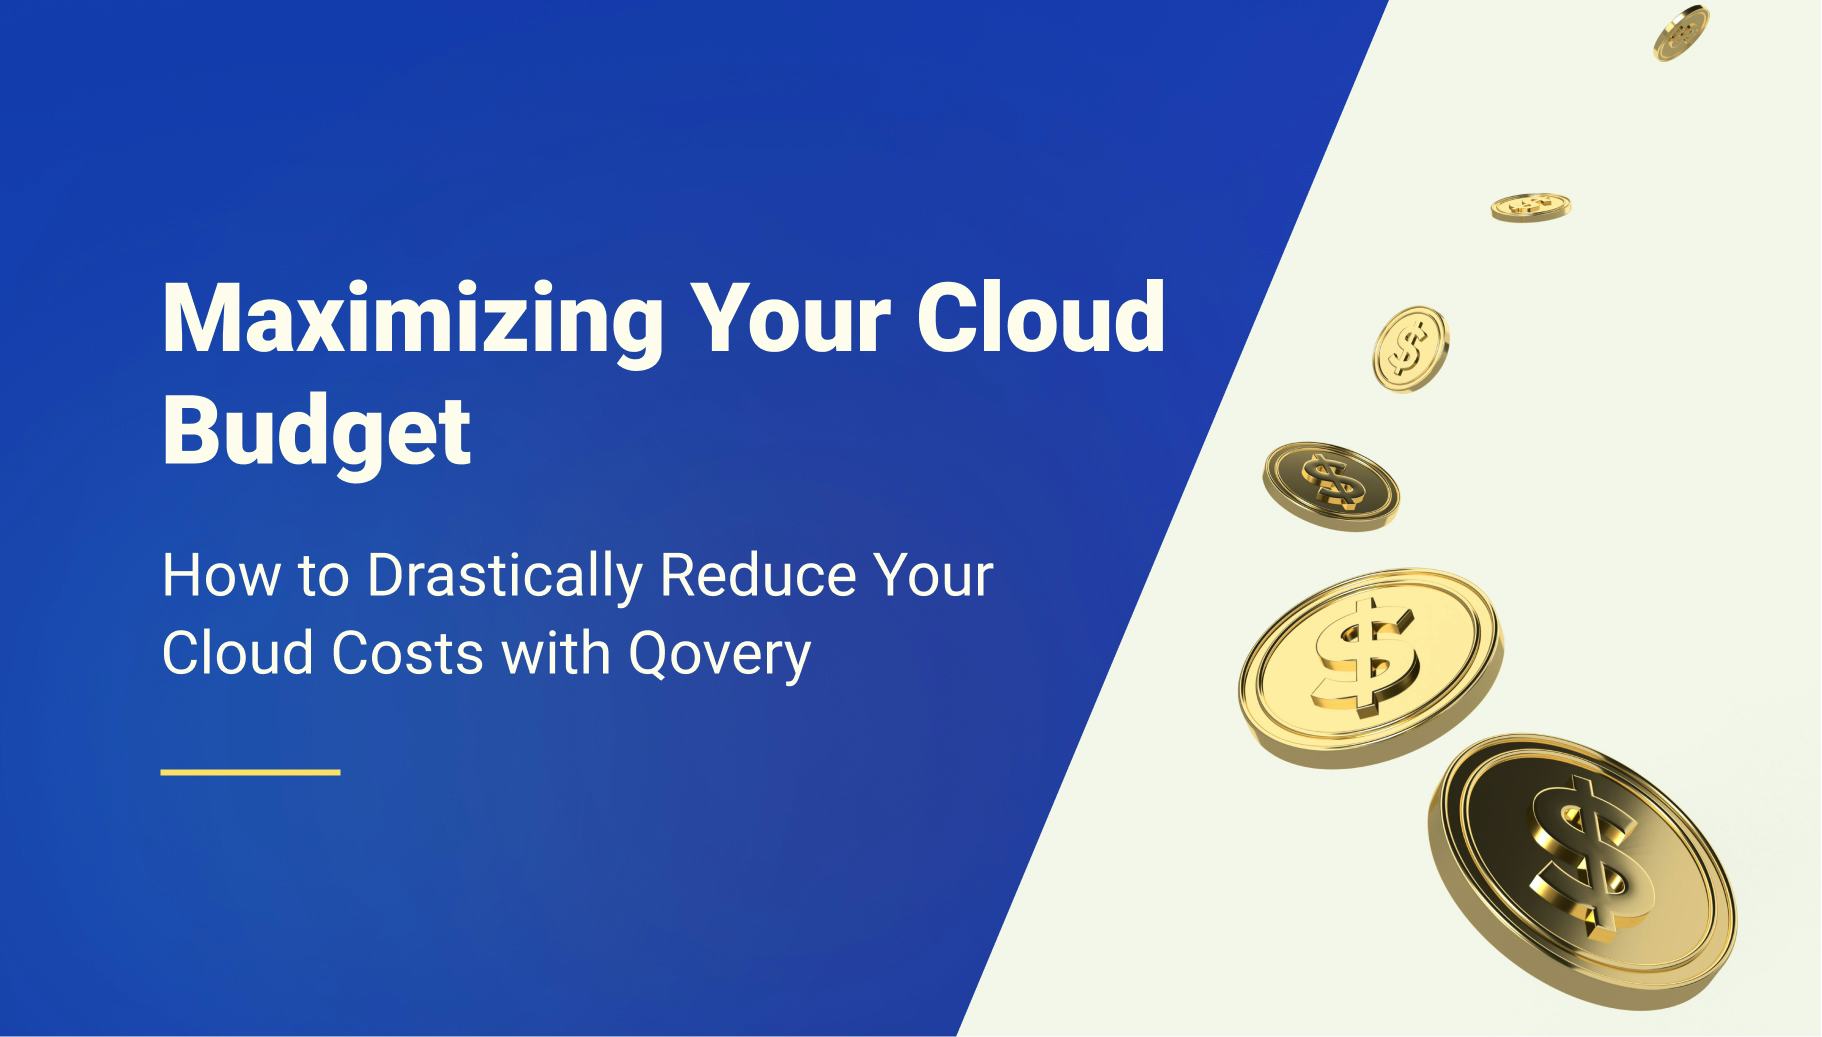 Maximizing Your Cloud Budget: How to Drastically Reduce Your Cloud Costs with Qovery